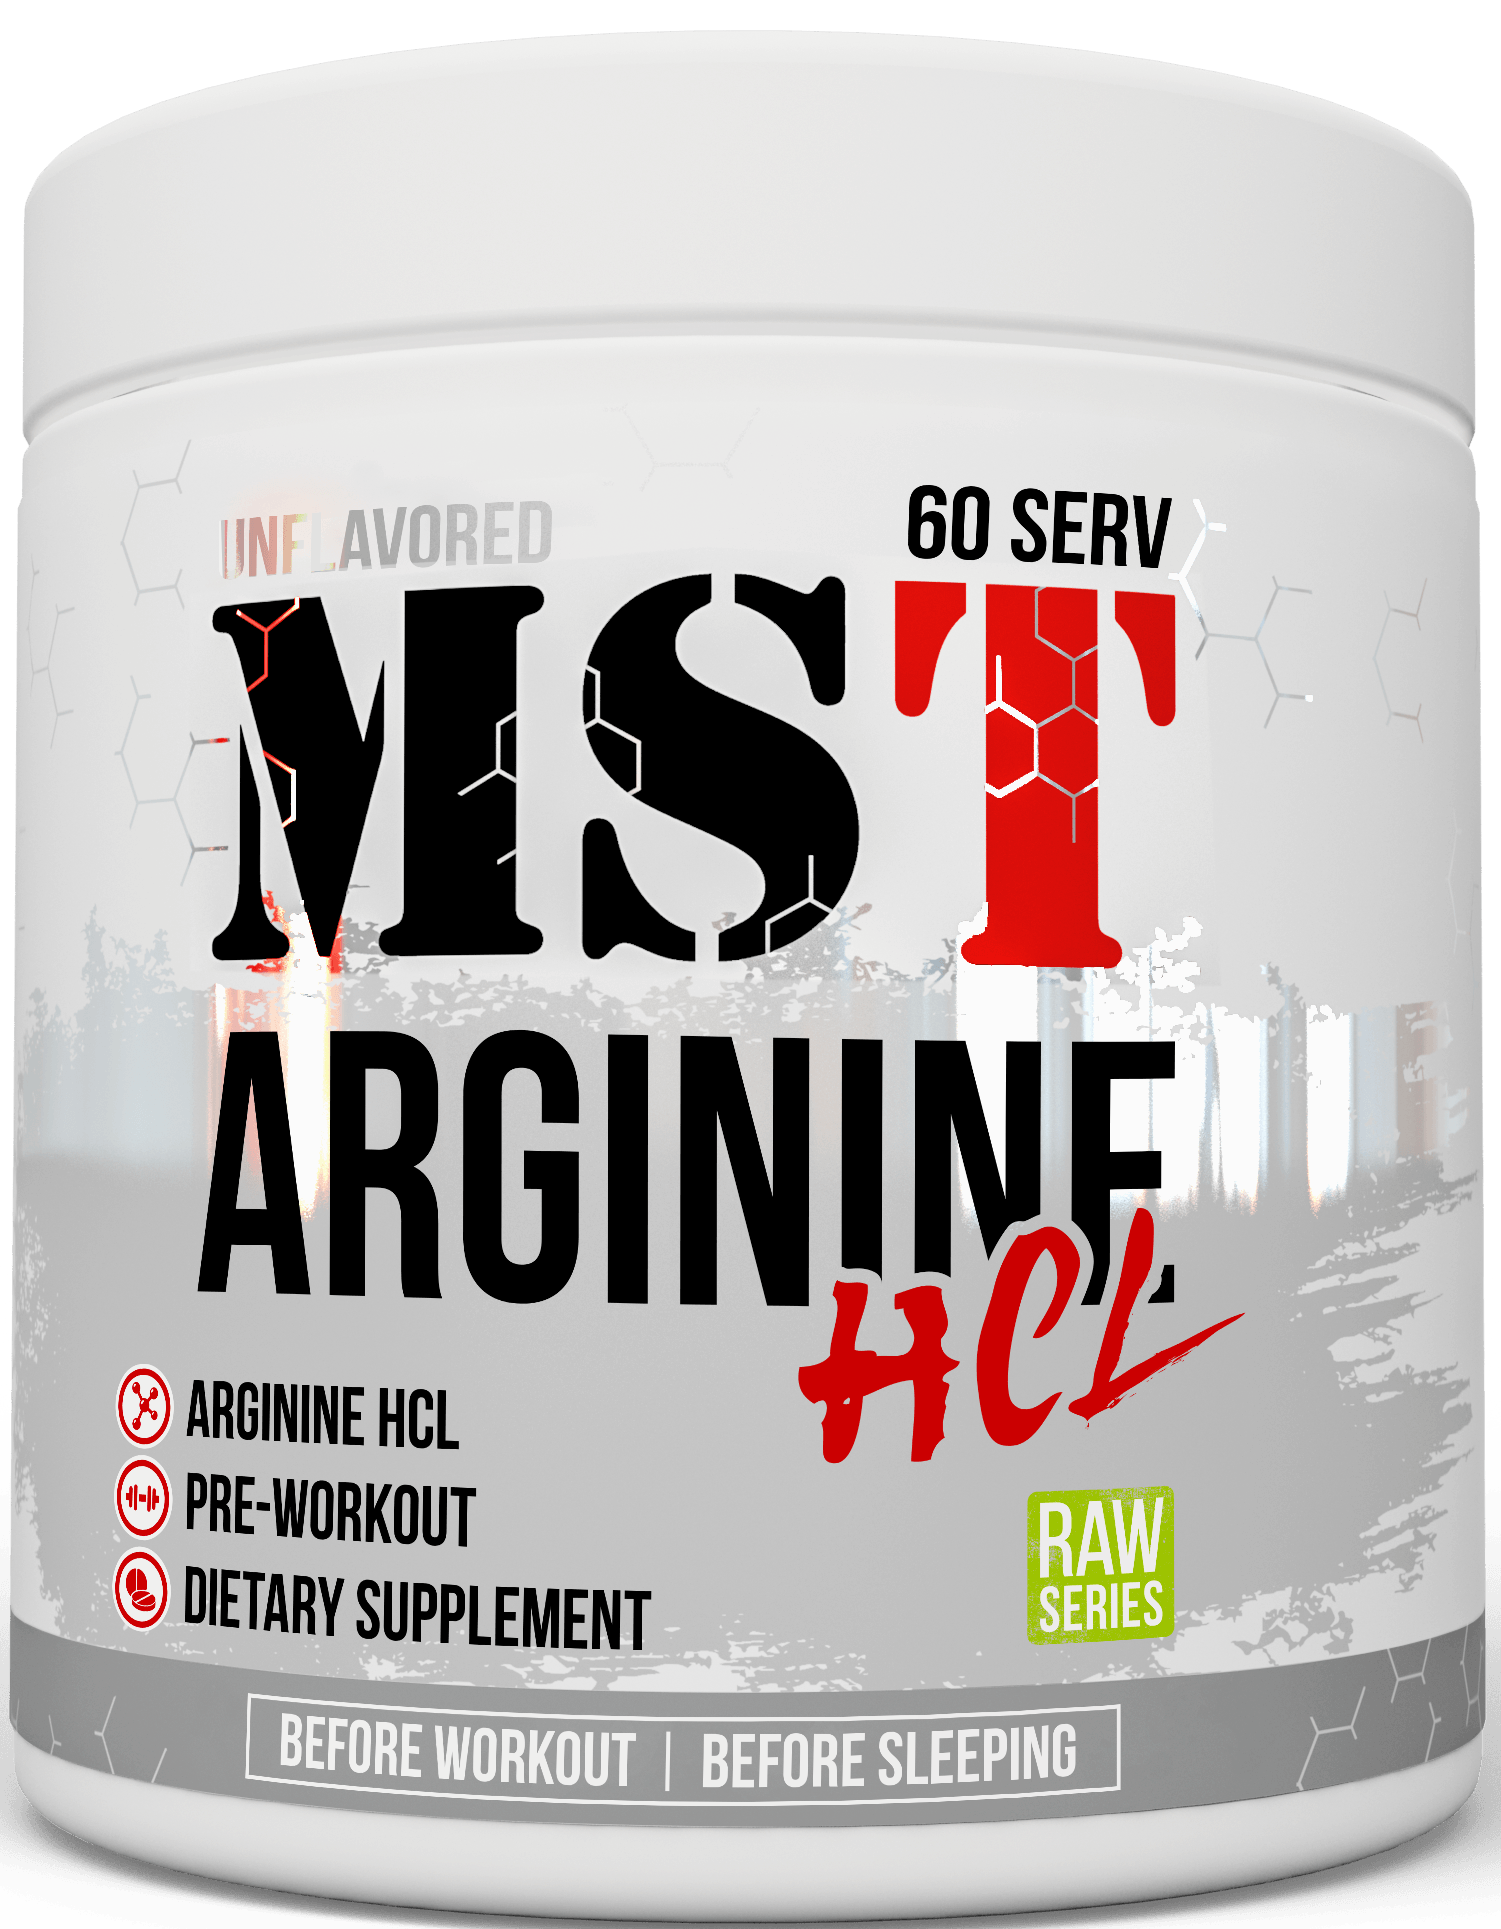 Arginine HCl, 300 g, MST Nutrition. Arginine. recovery Immunity enhancement Muscle pumping Antioxidant properties Lowering cholesterol Nitric oxide donor 